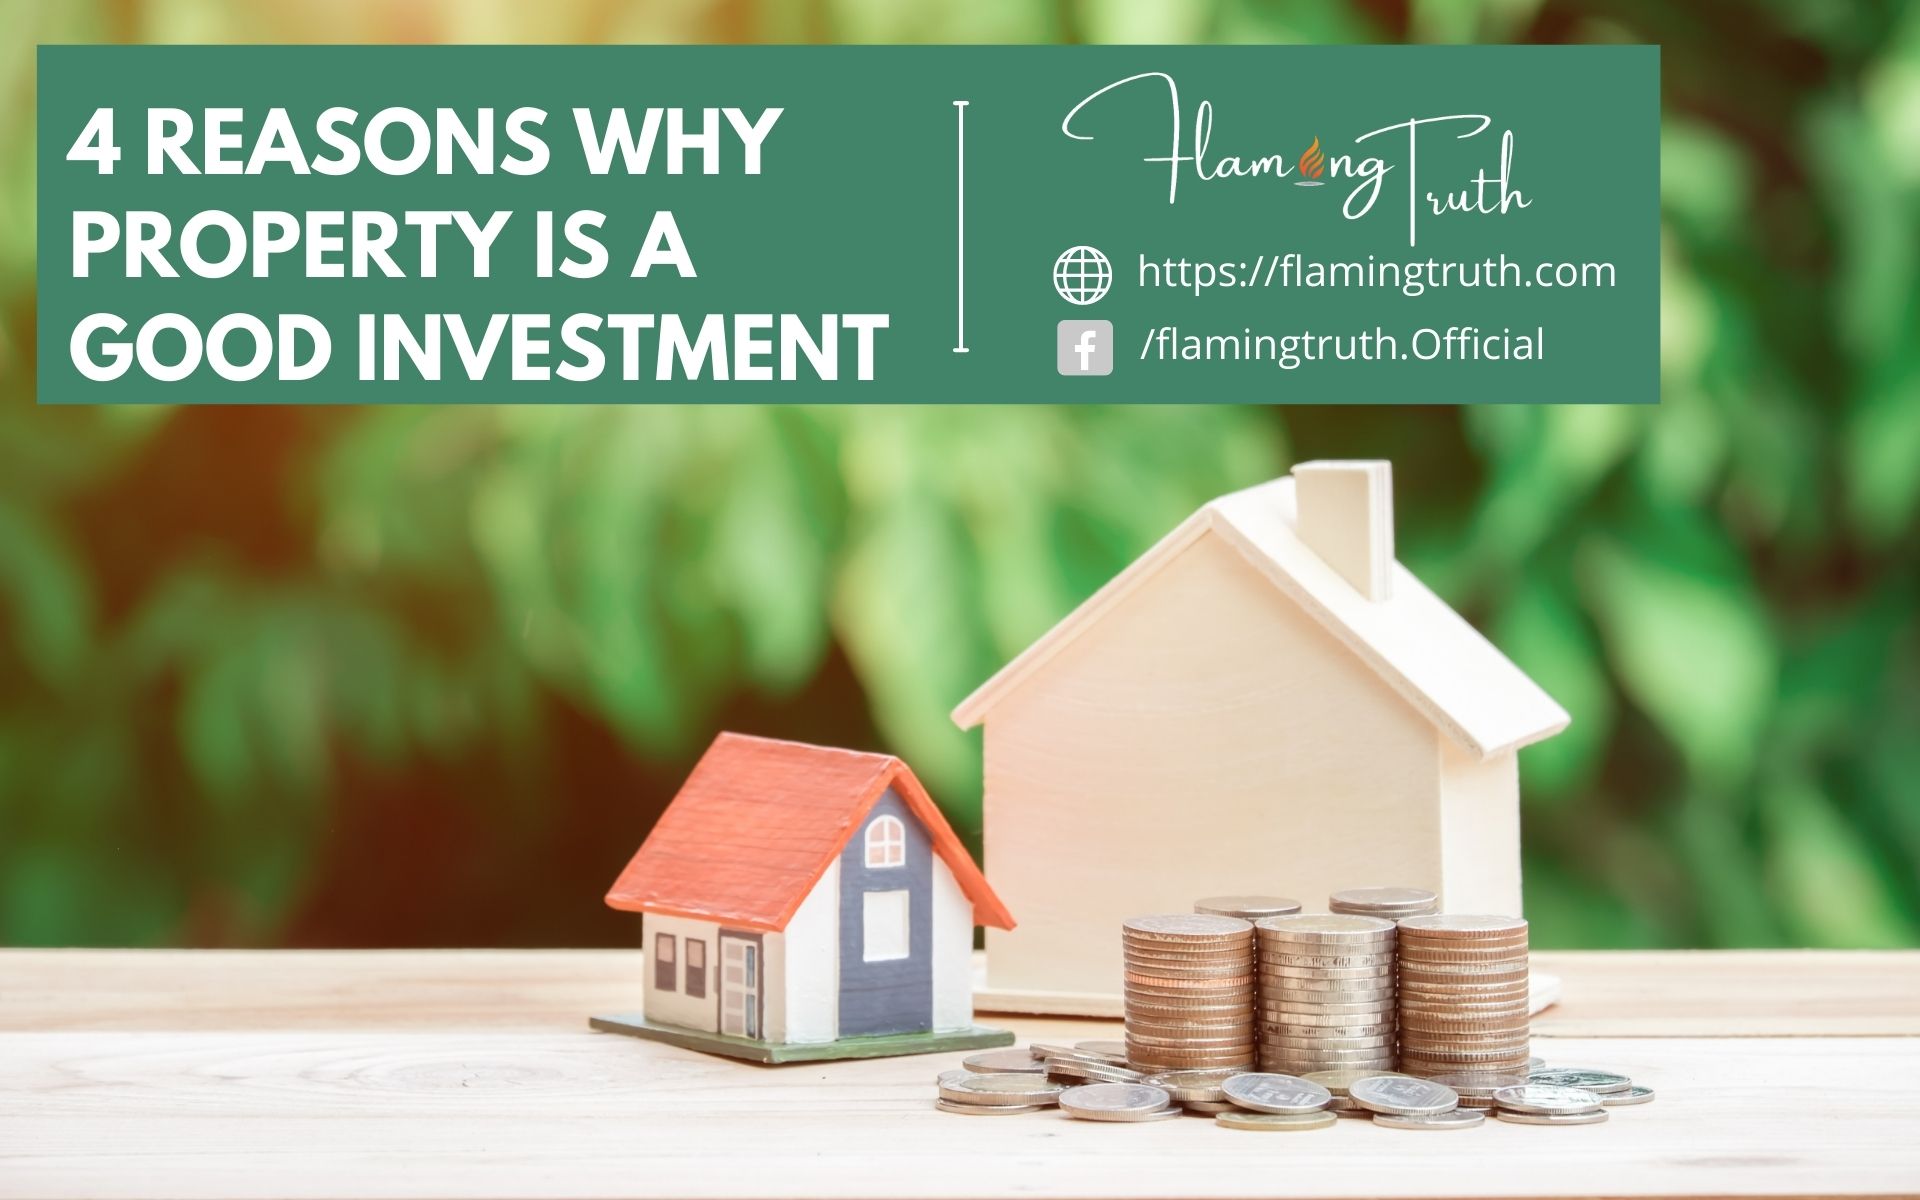 4 Reasons Why Property is a Good Investment